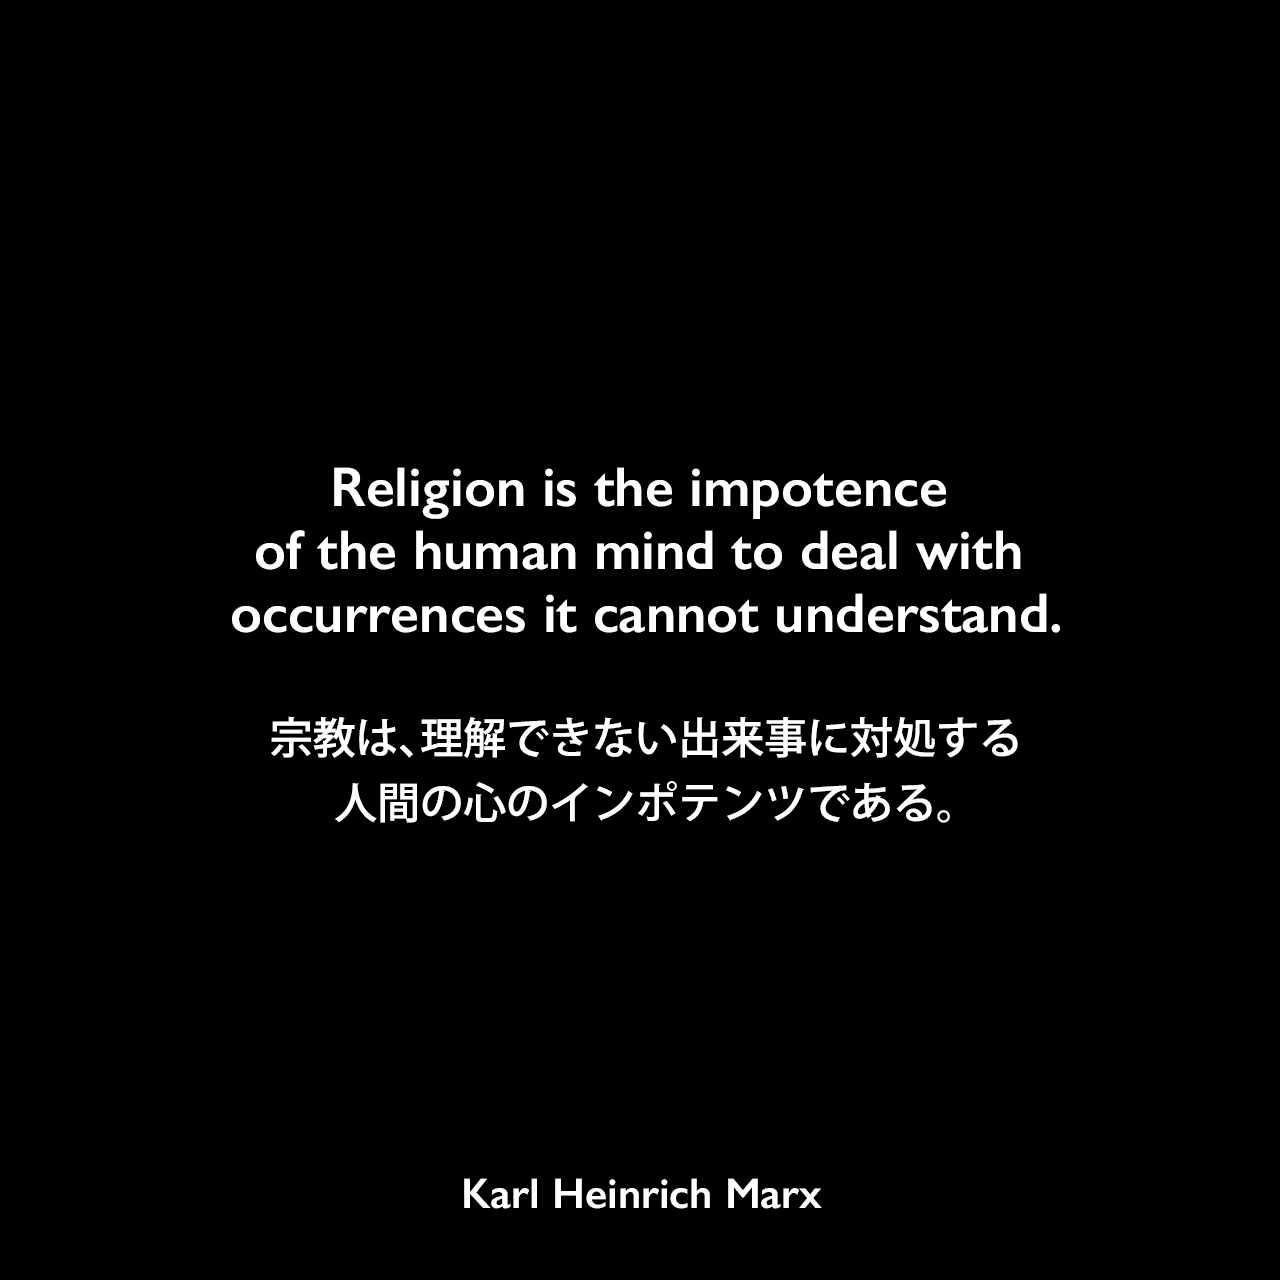 Religion is the impotence of the human mind to deal with occurrences it cannot understand.宗教は、理解できない出来事に対処する人間の心のインポテンツである。Karl Heinrich Marx